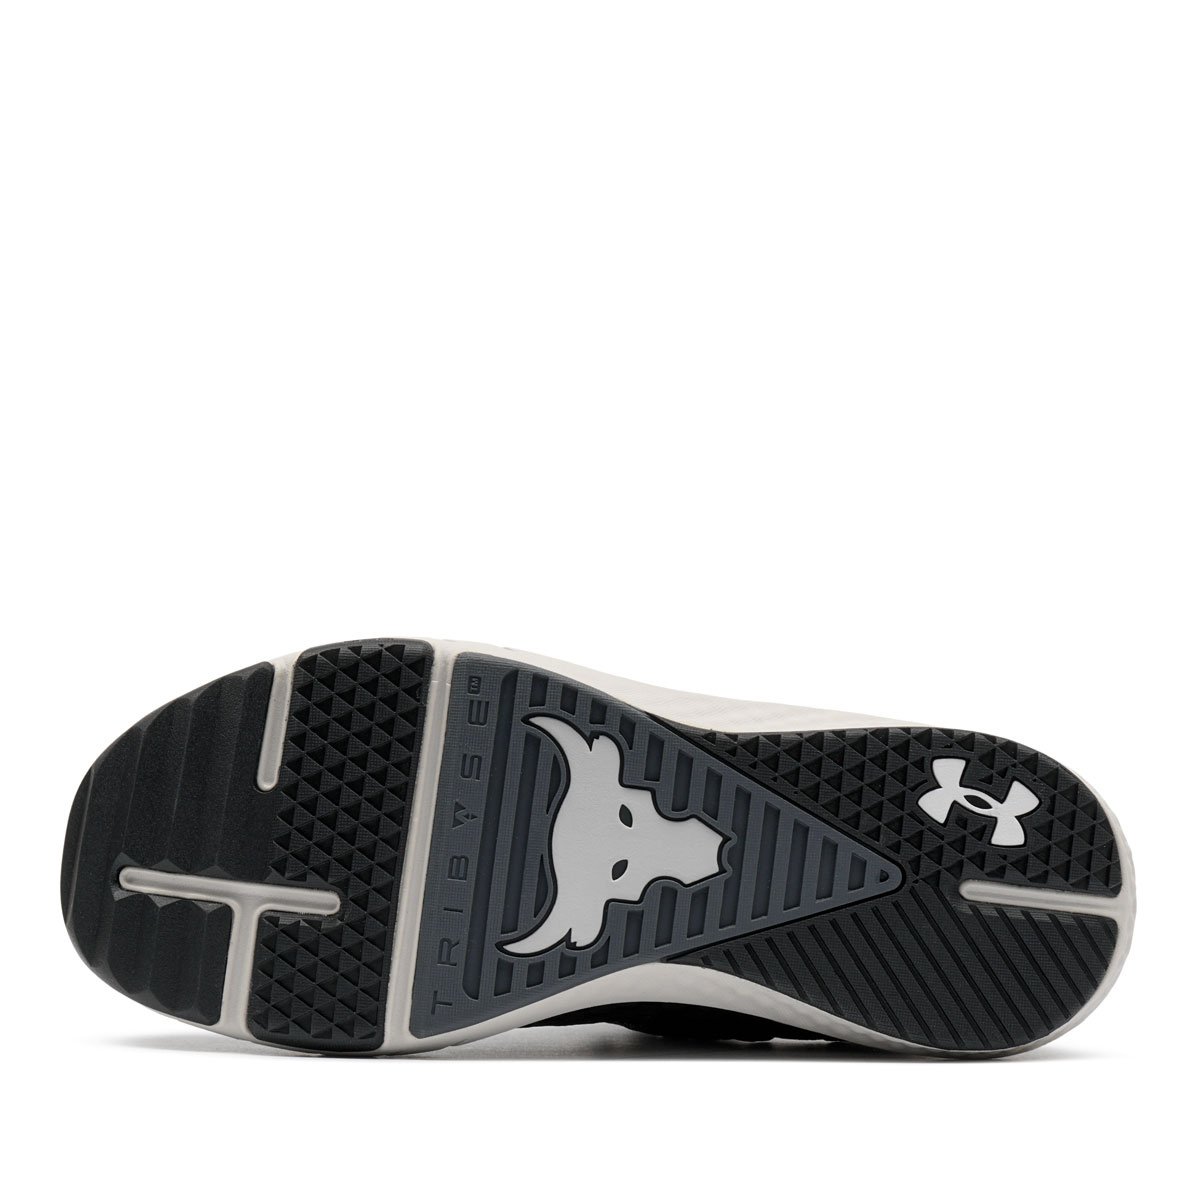 Under Armour Project Rock BSR 4 Мъжки маратонки 3027344-001